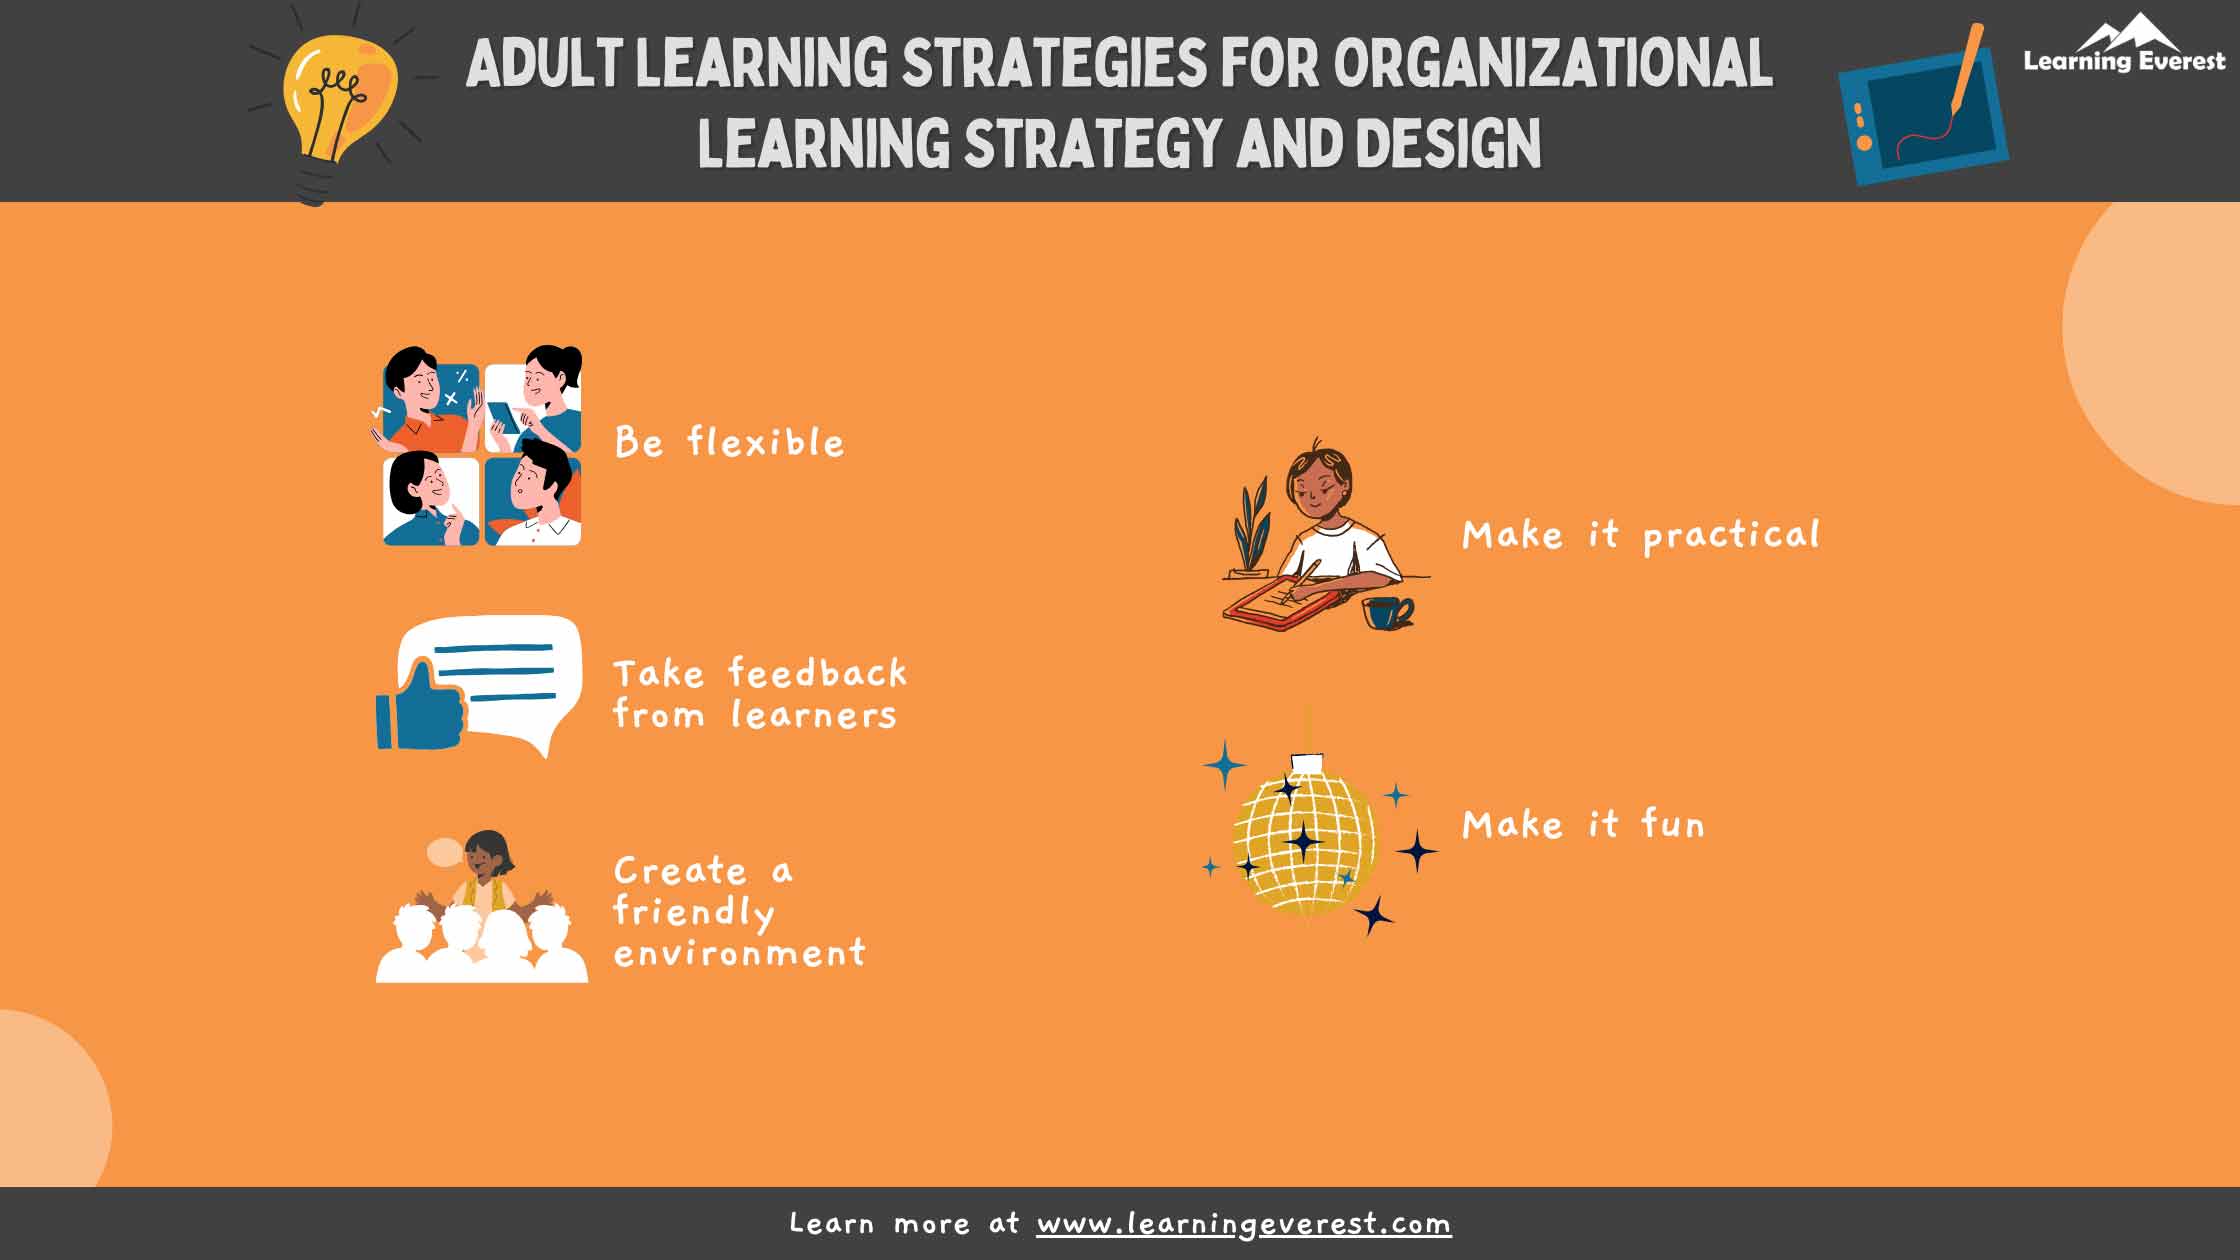 Adult Learning Strategies for Organizational Learning Strategy and Design